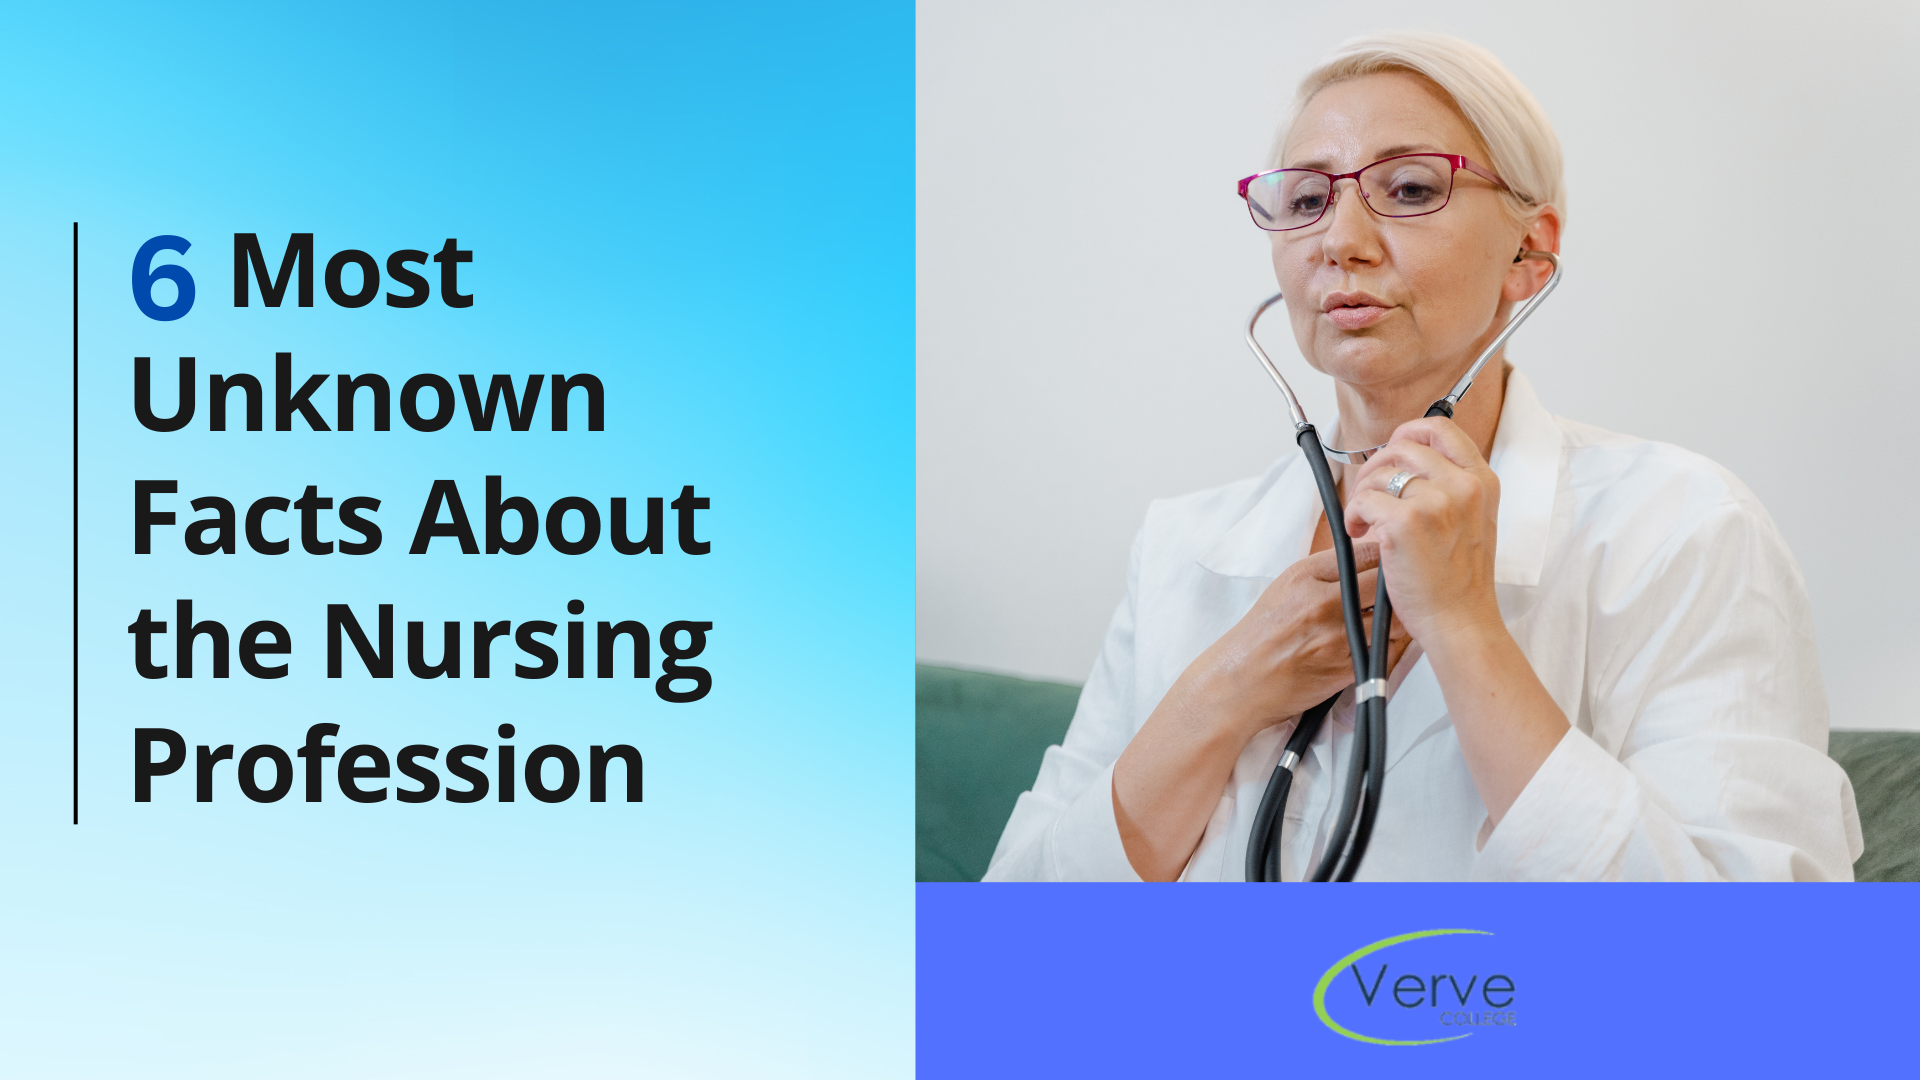 6 Most Unknown Facts About the Nursing Profession